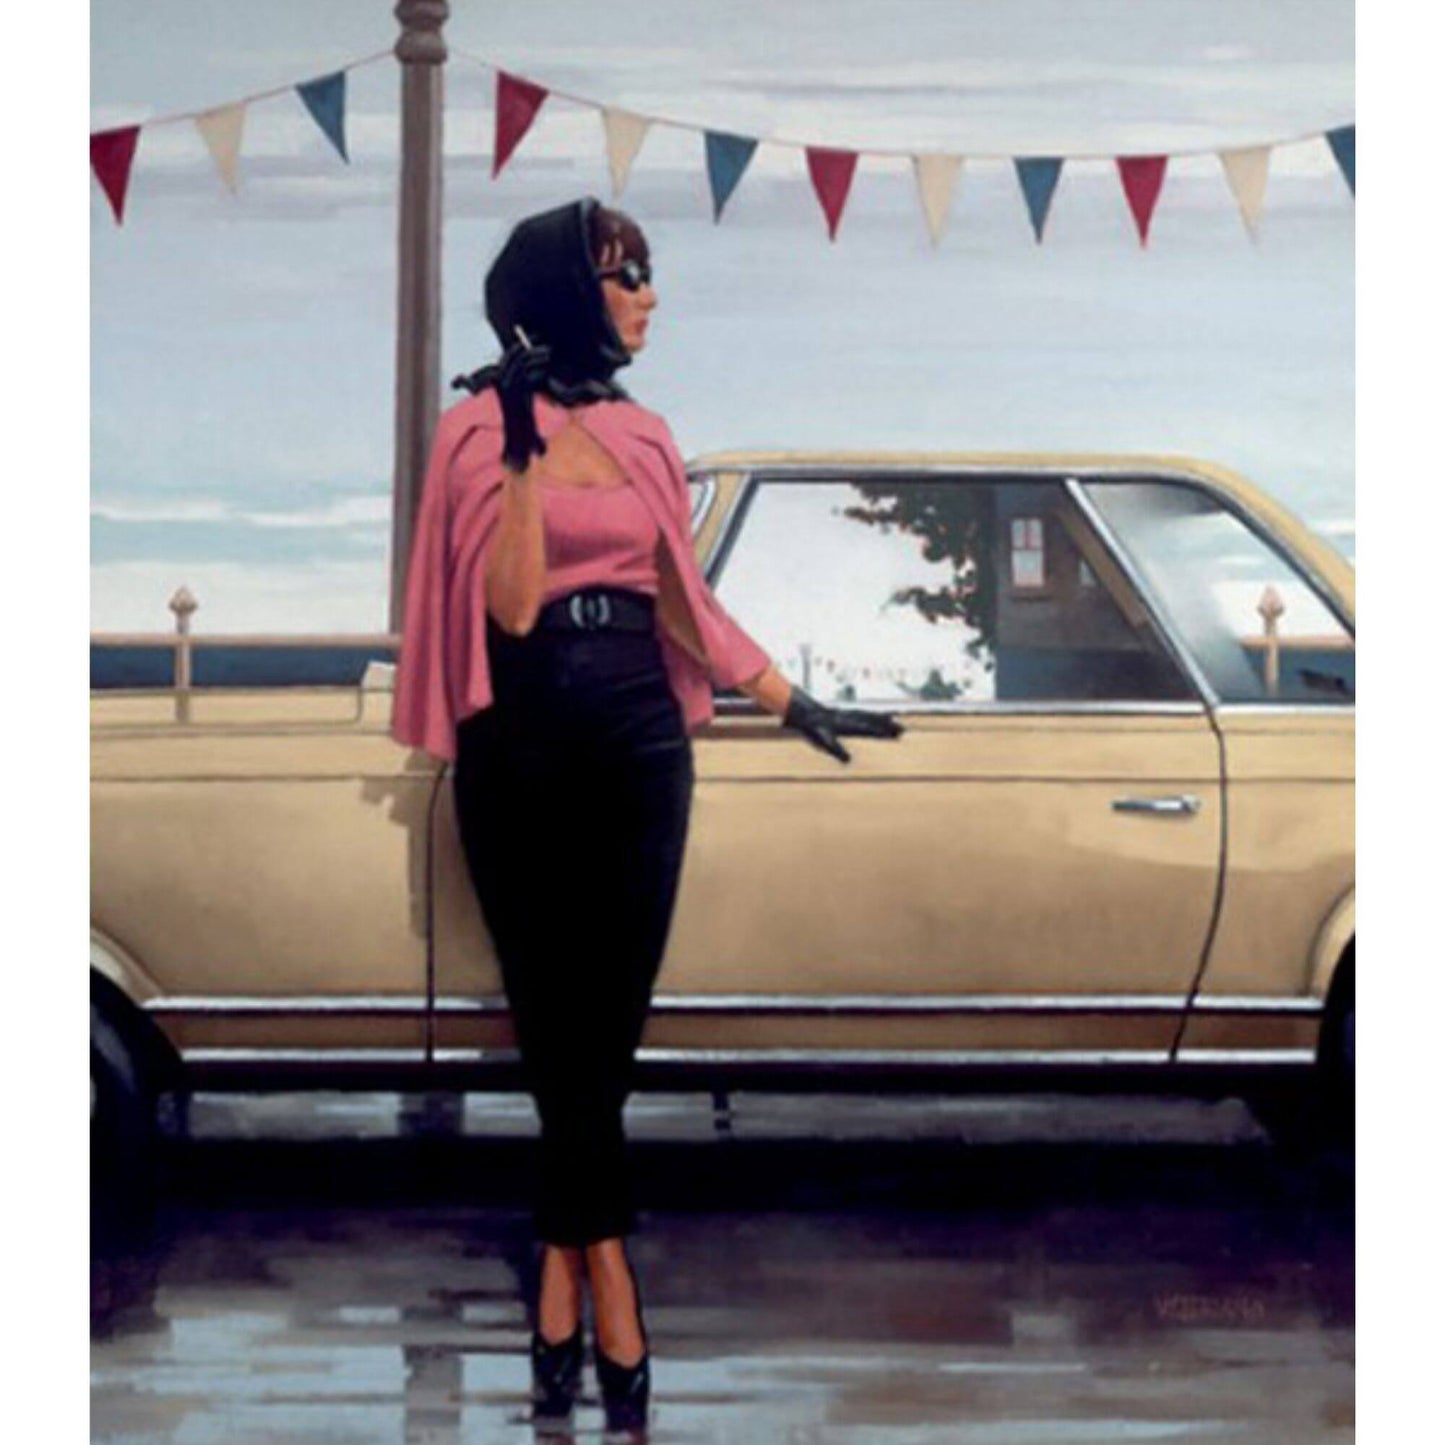 Load image into Gallery viewer, Suddenly One Summer by Jack Vettriano
